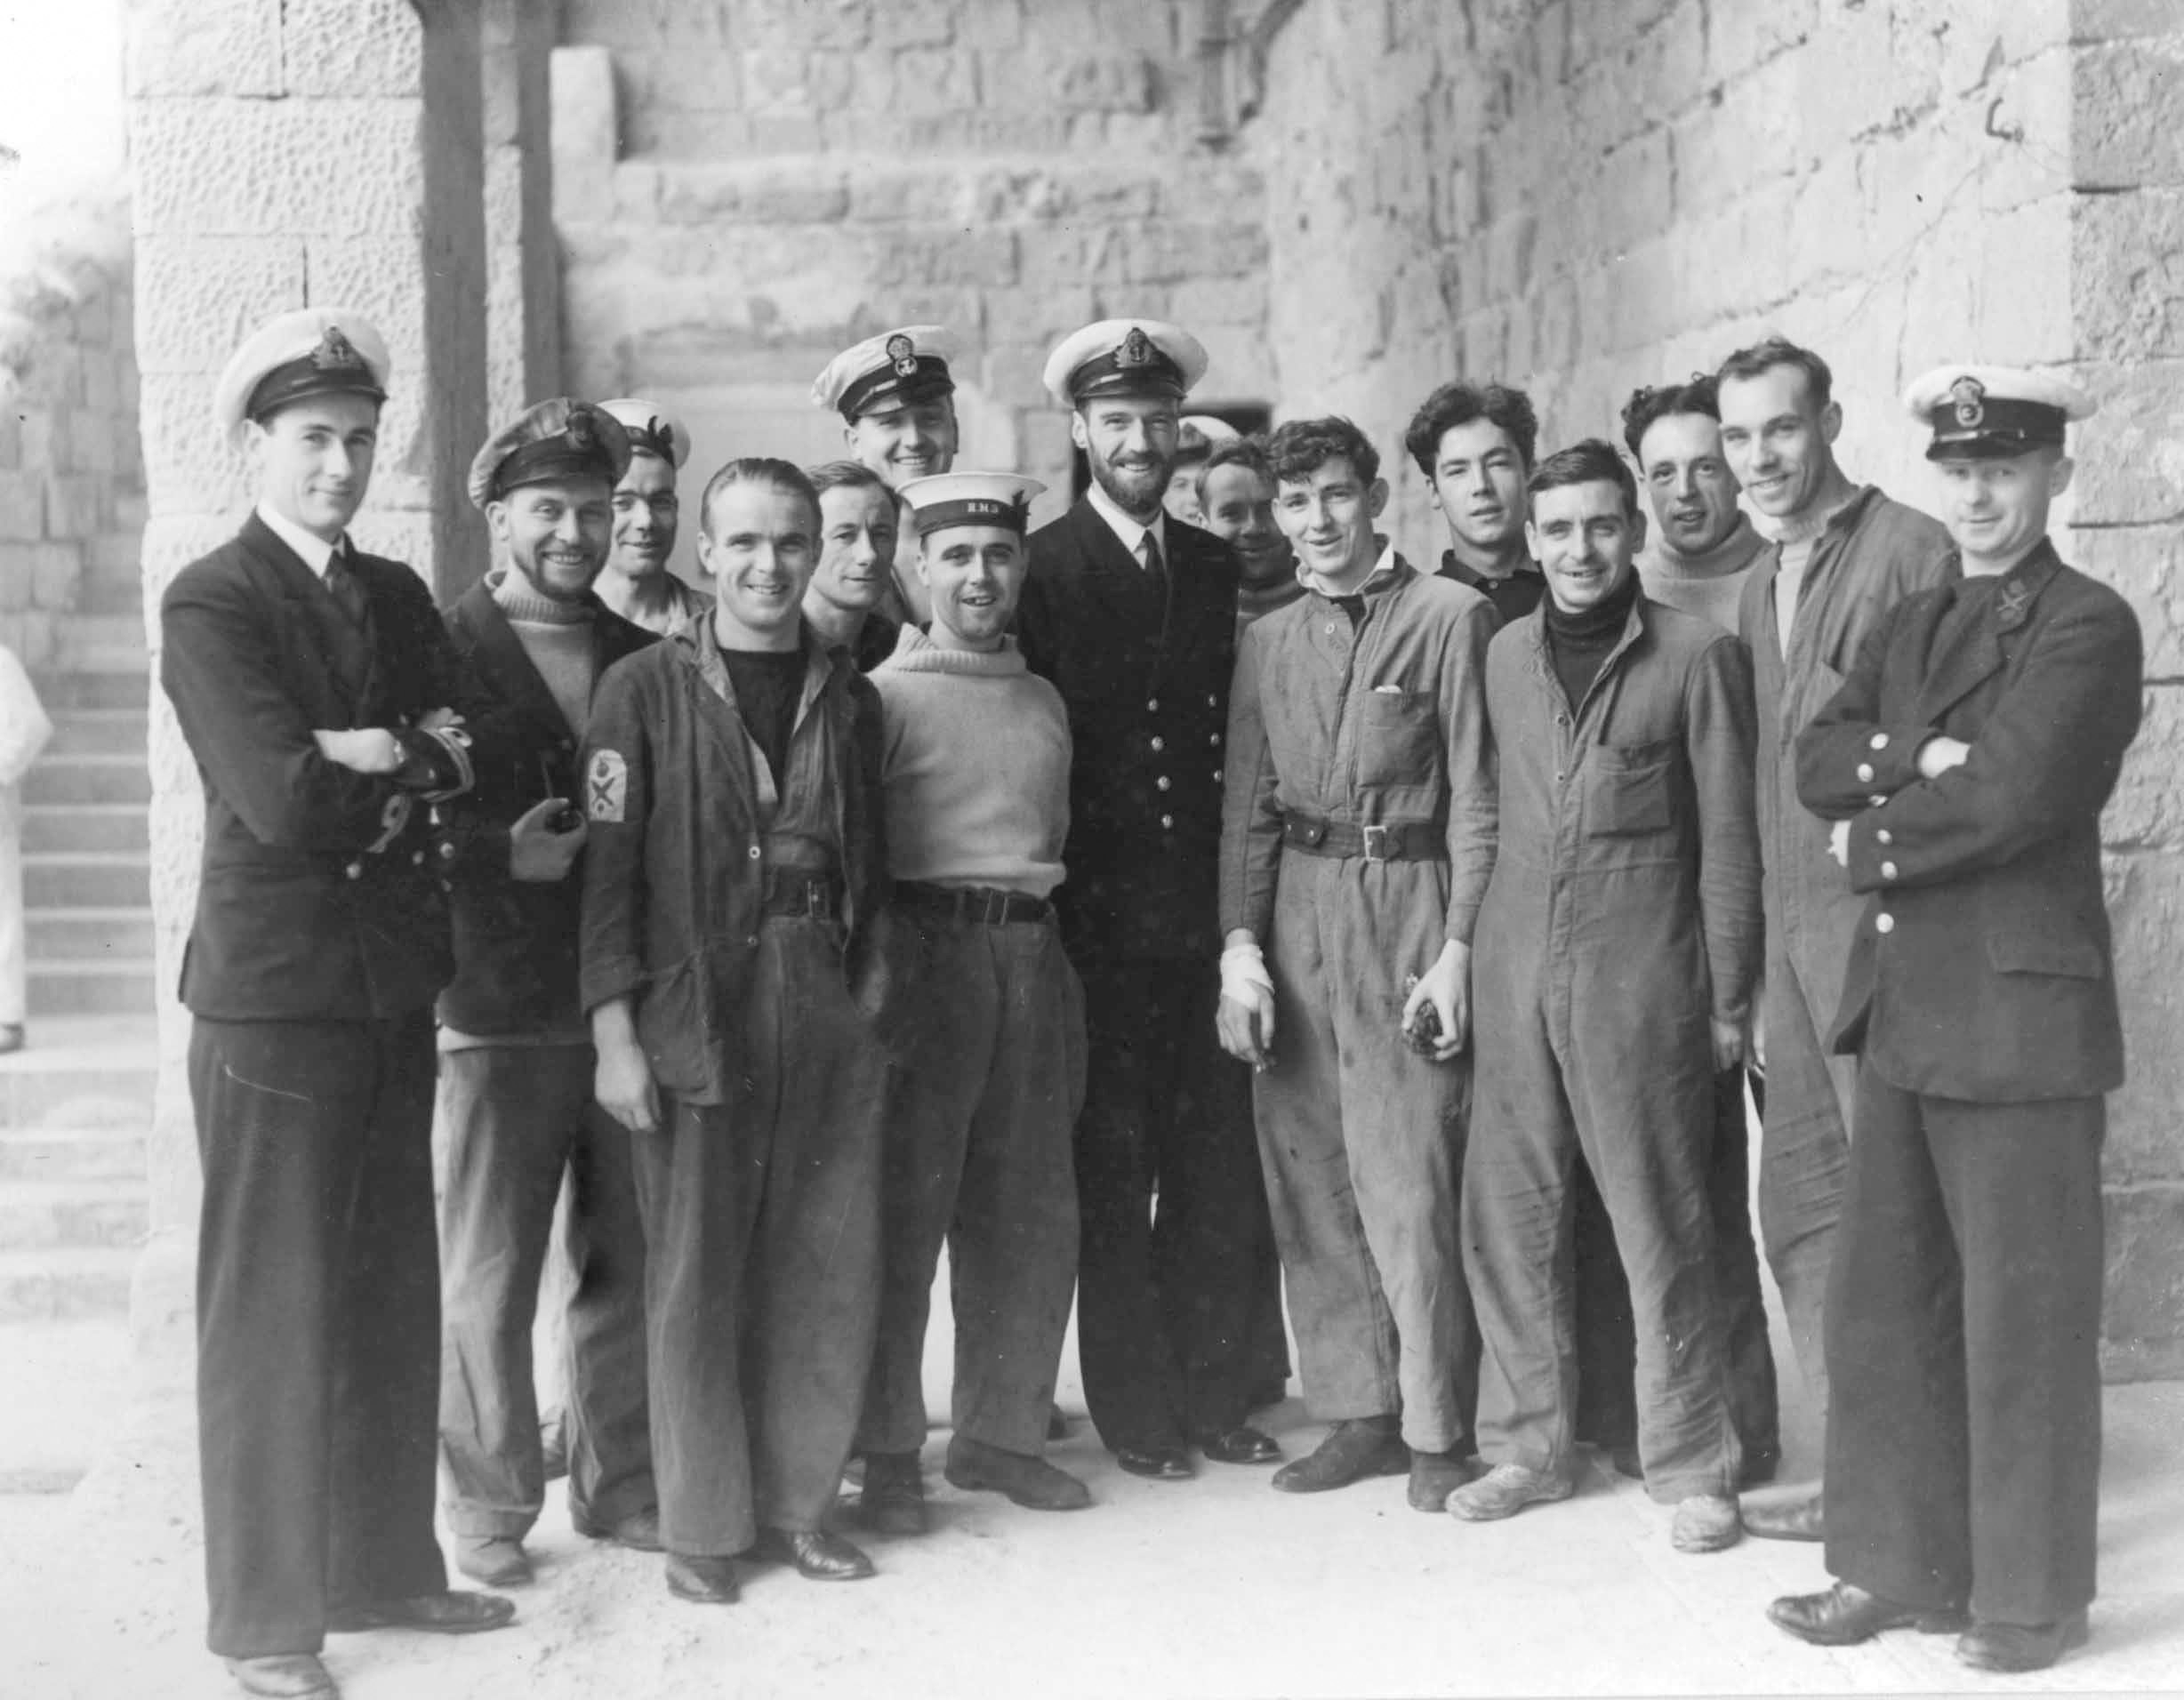 Born in India, Lt. Cmdr. Malcolm David Wanklyn was a graduate of the Royal Navy College at Dartmouth. Here, he stands (bearded, center) with Upholder’s crew at Lazaretto in late 1941.